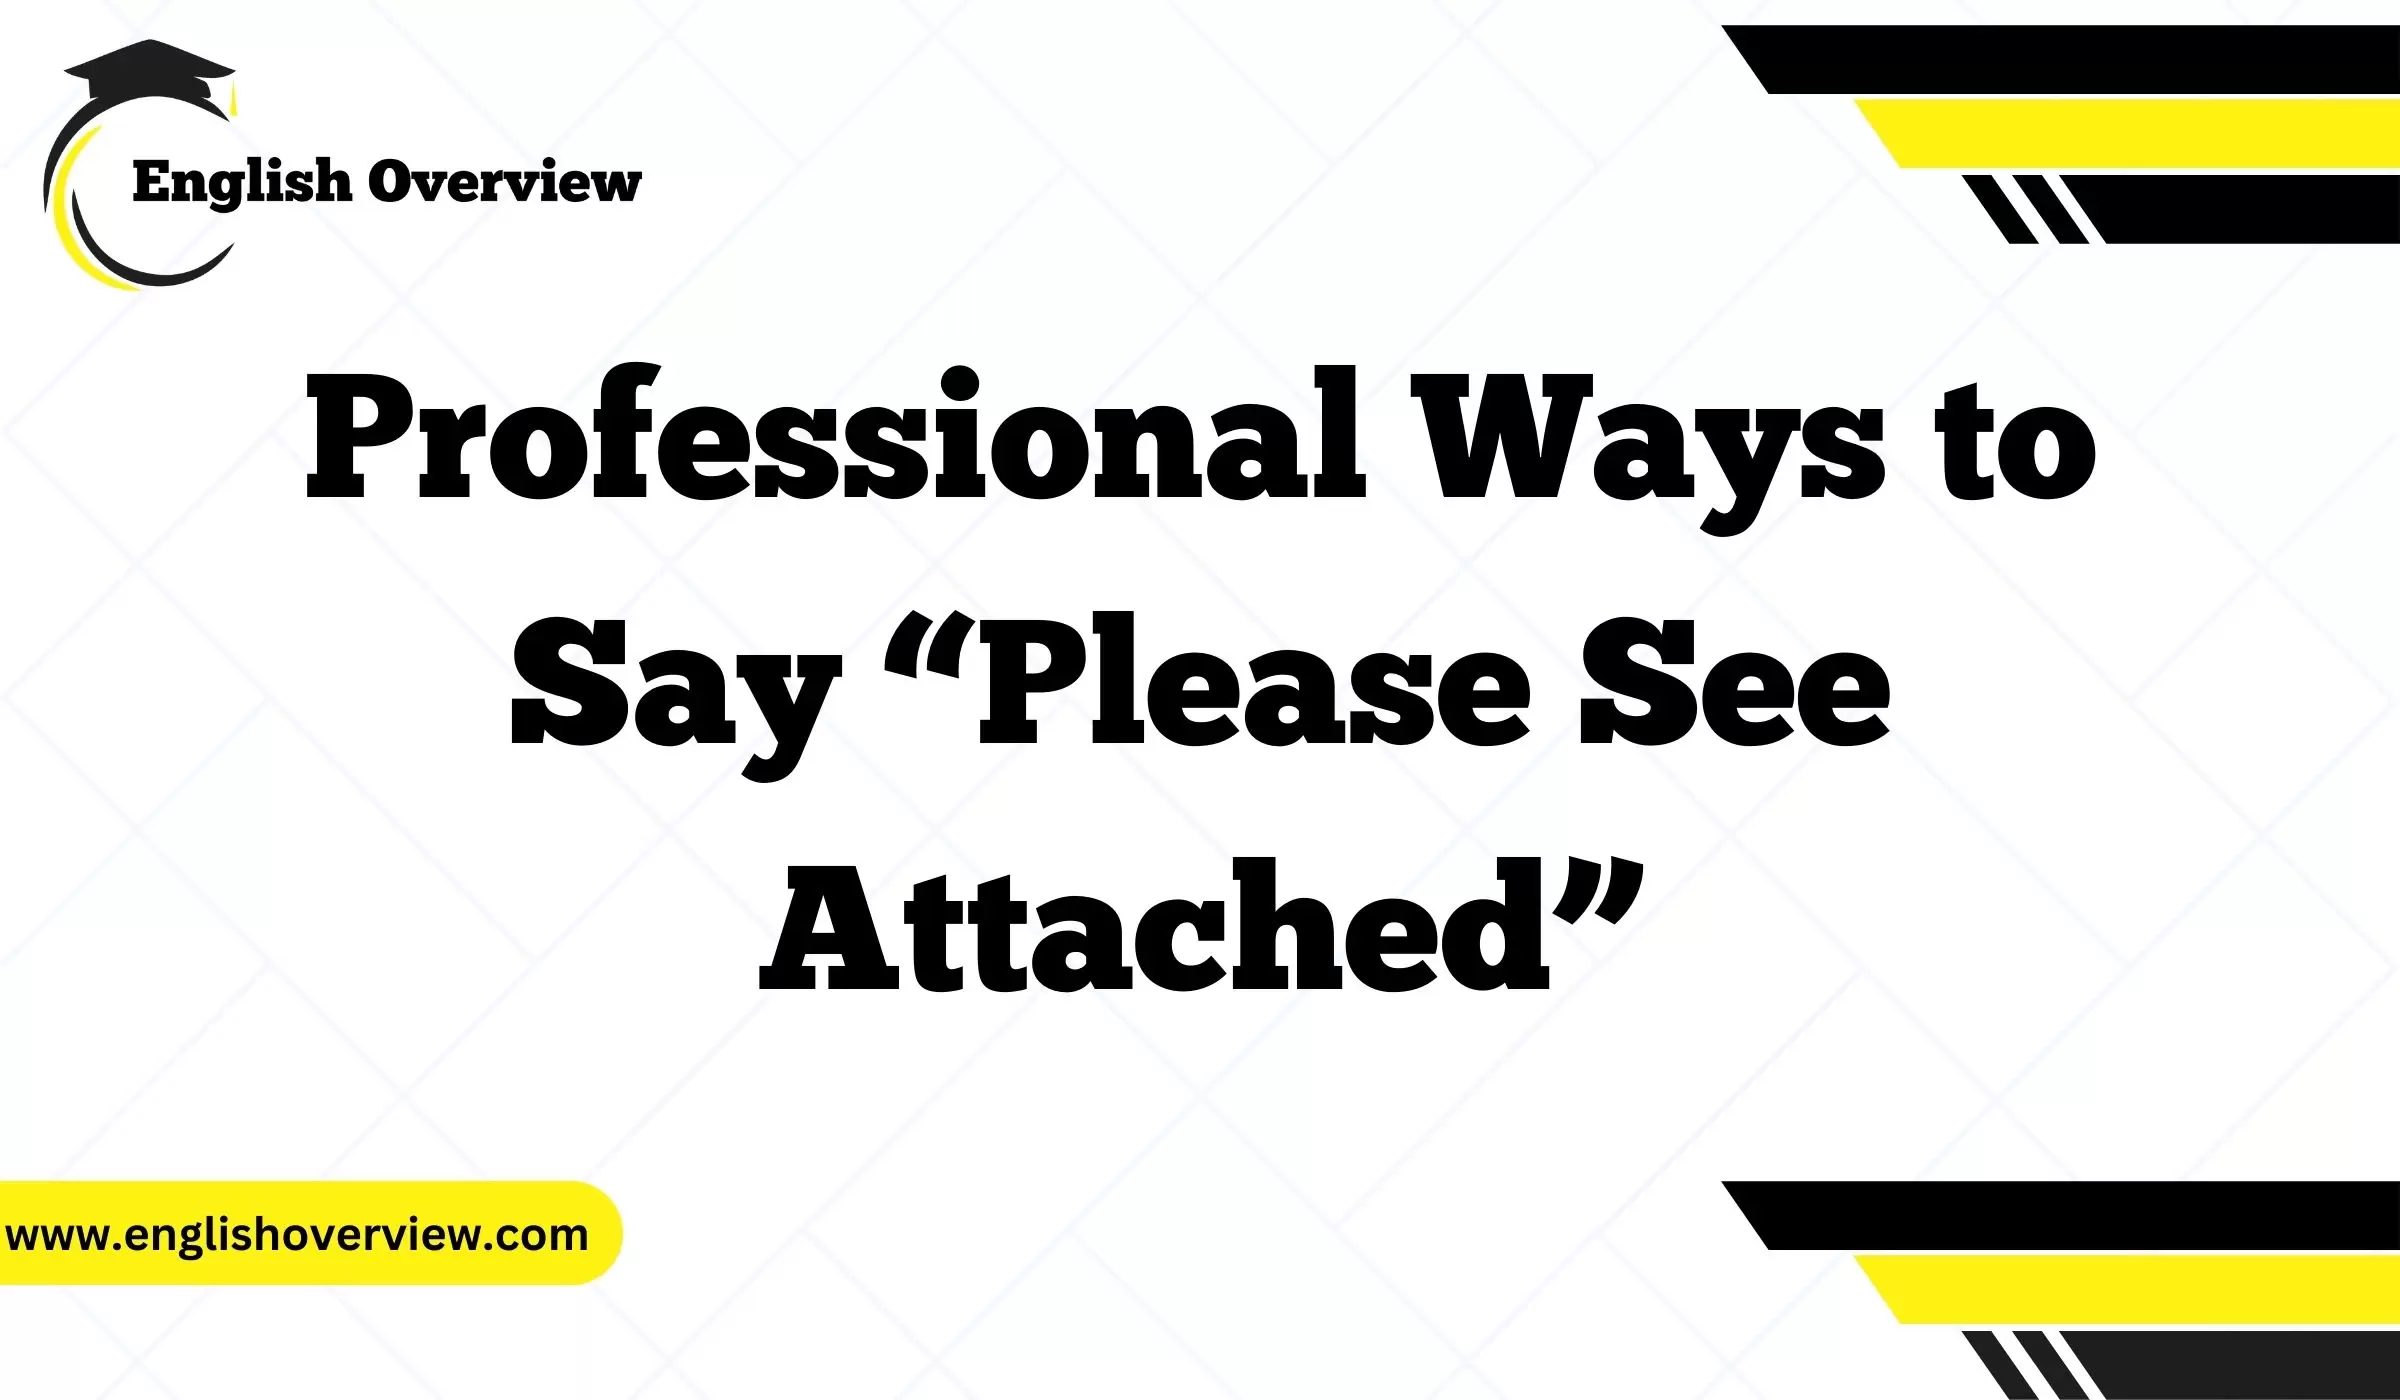 Professional Ways to Say “Please See Attached”